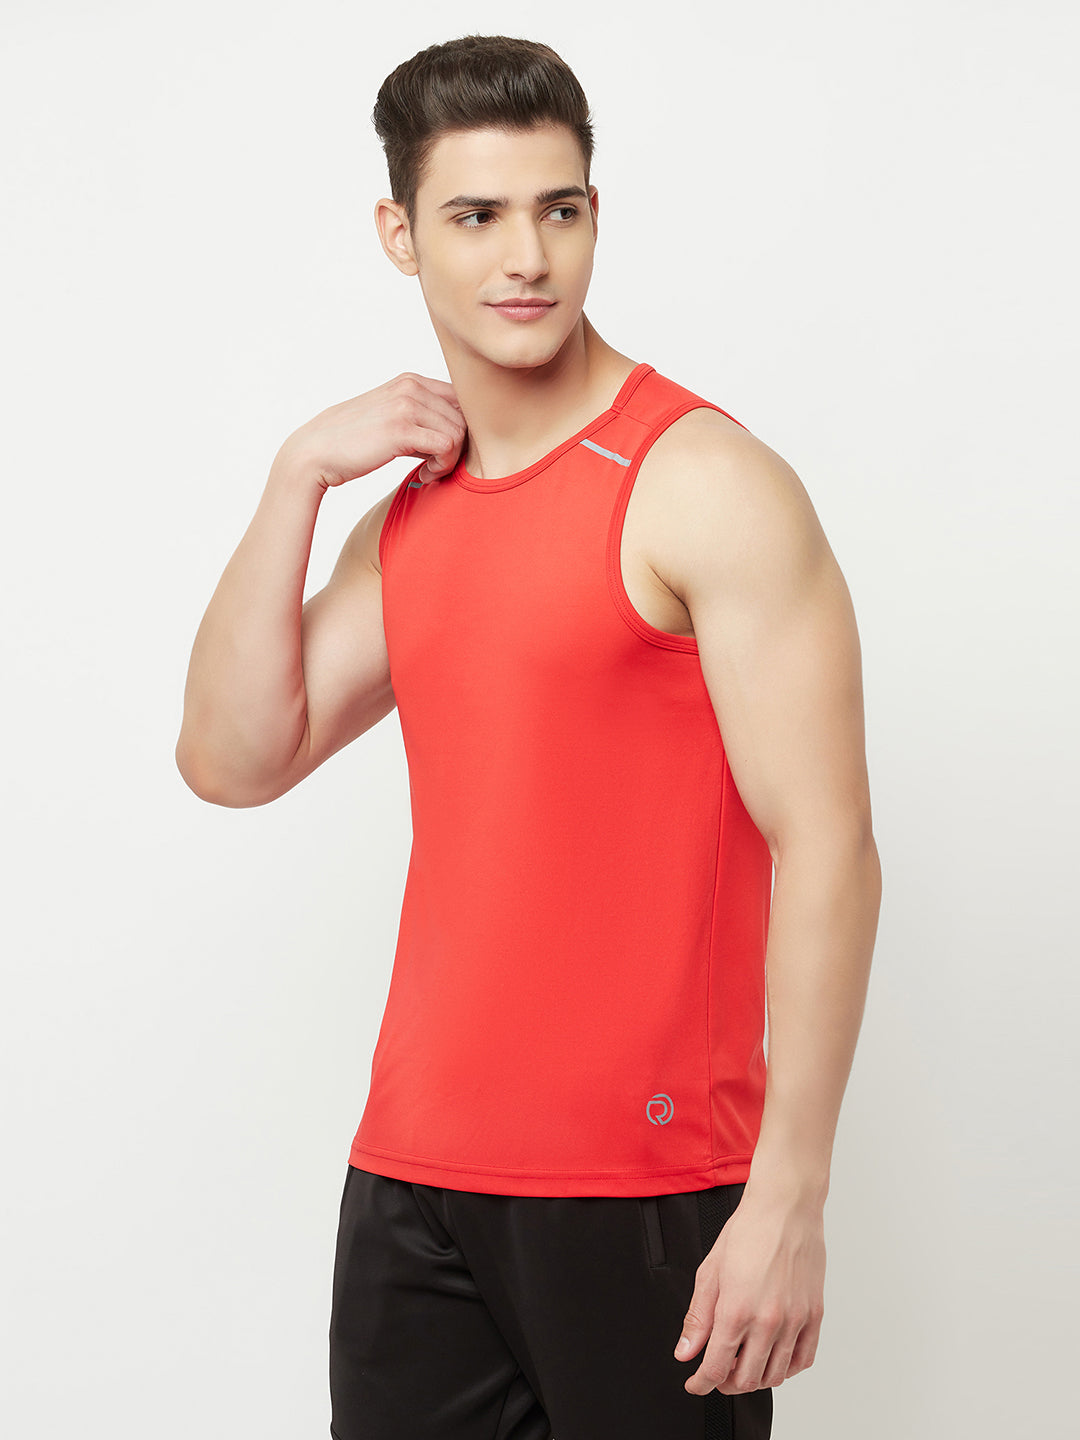 Reflective Running Tank - Pack of 2 White & Red